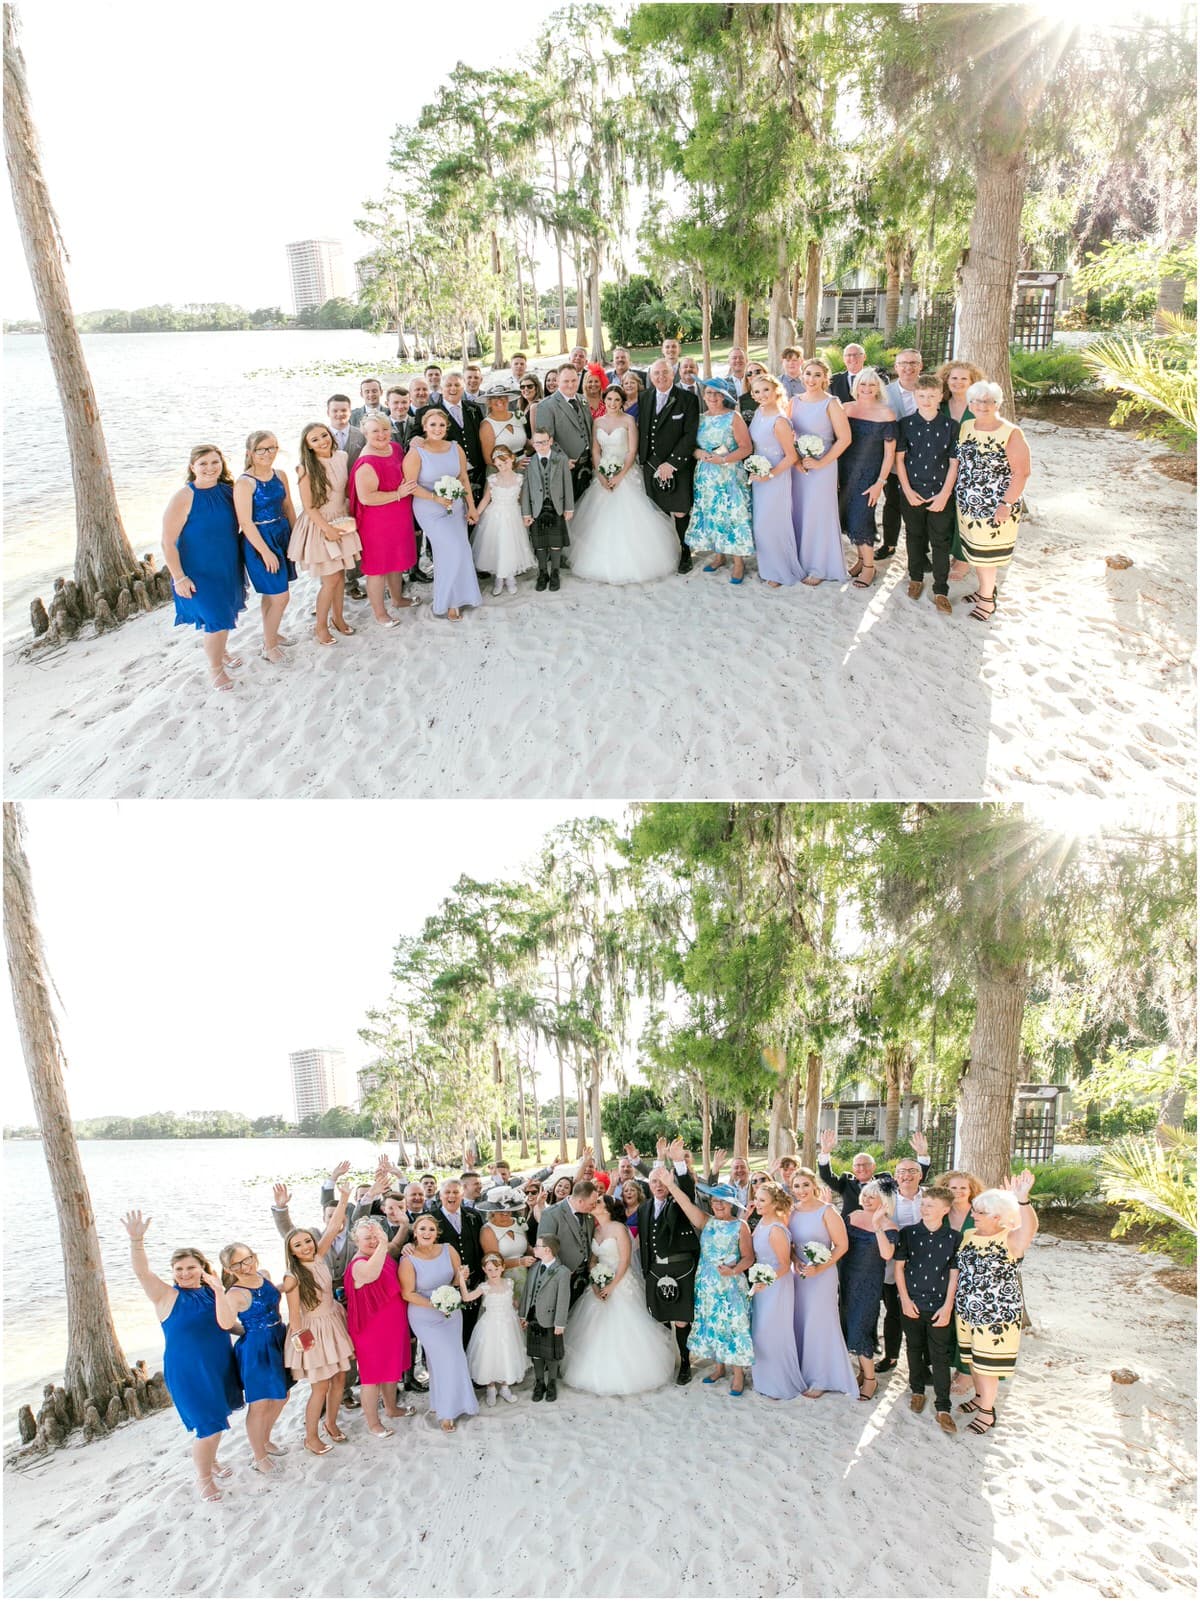 The entire wedding party and guests taking a group shot on the beach. 